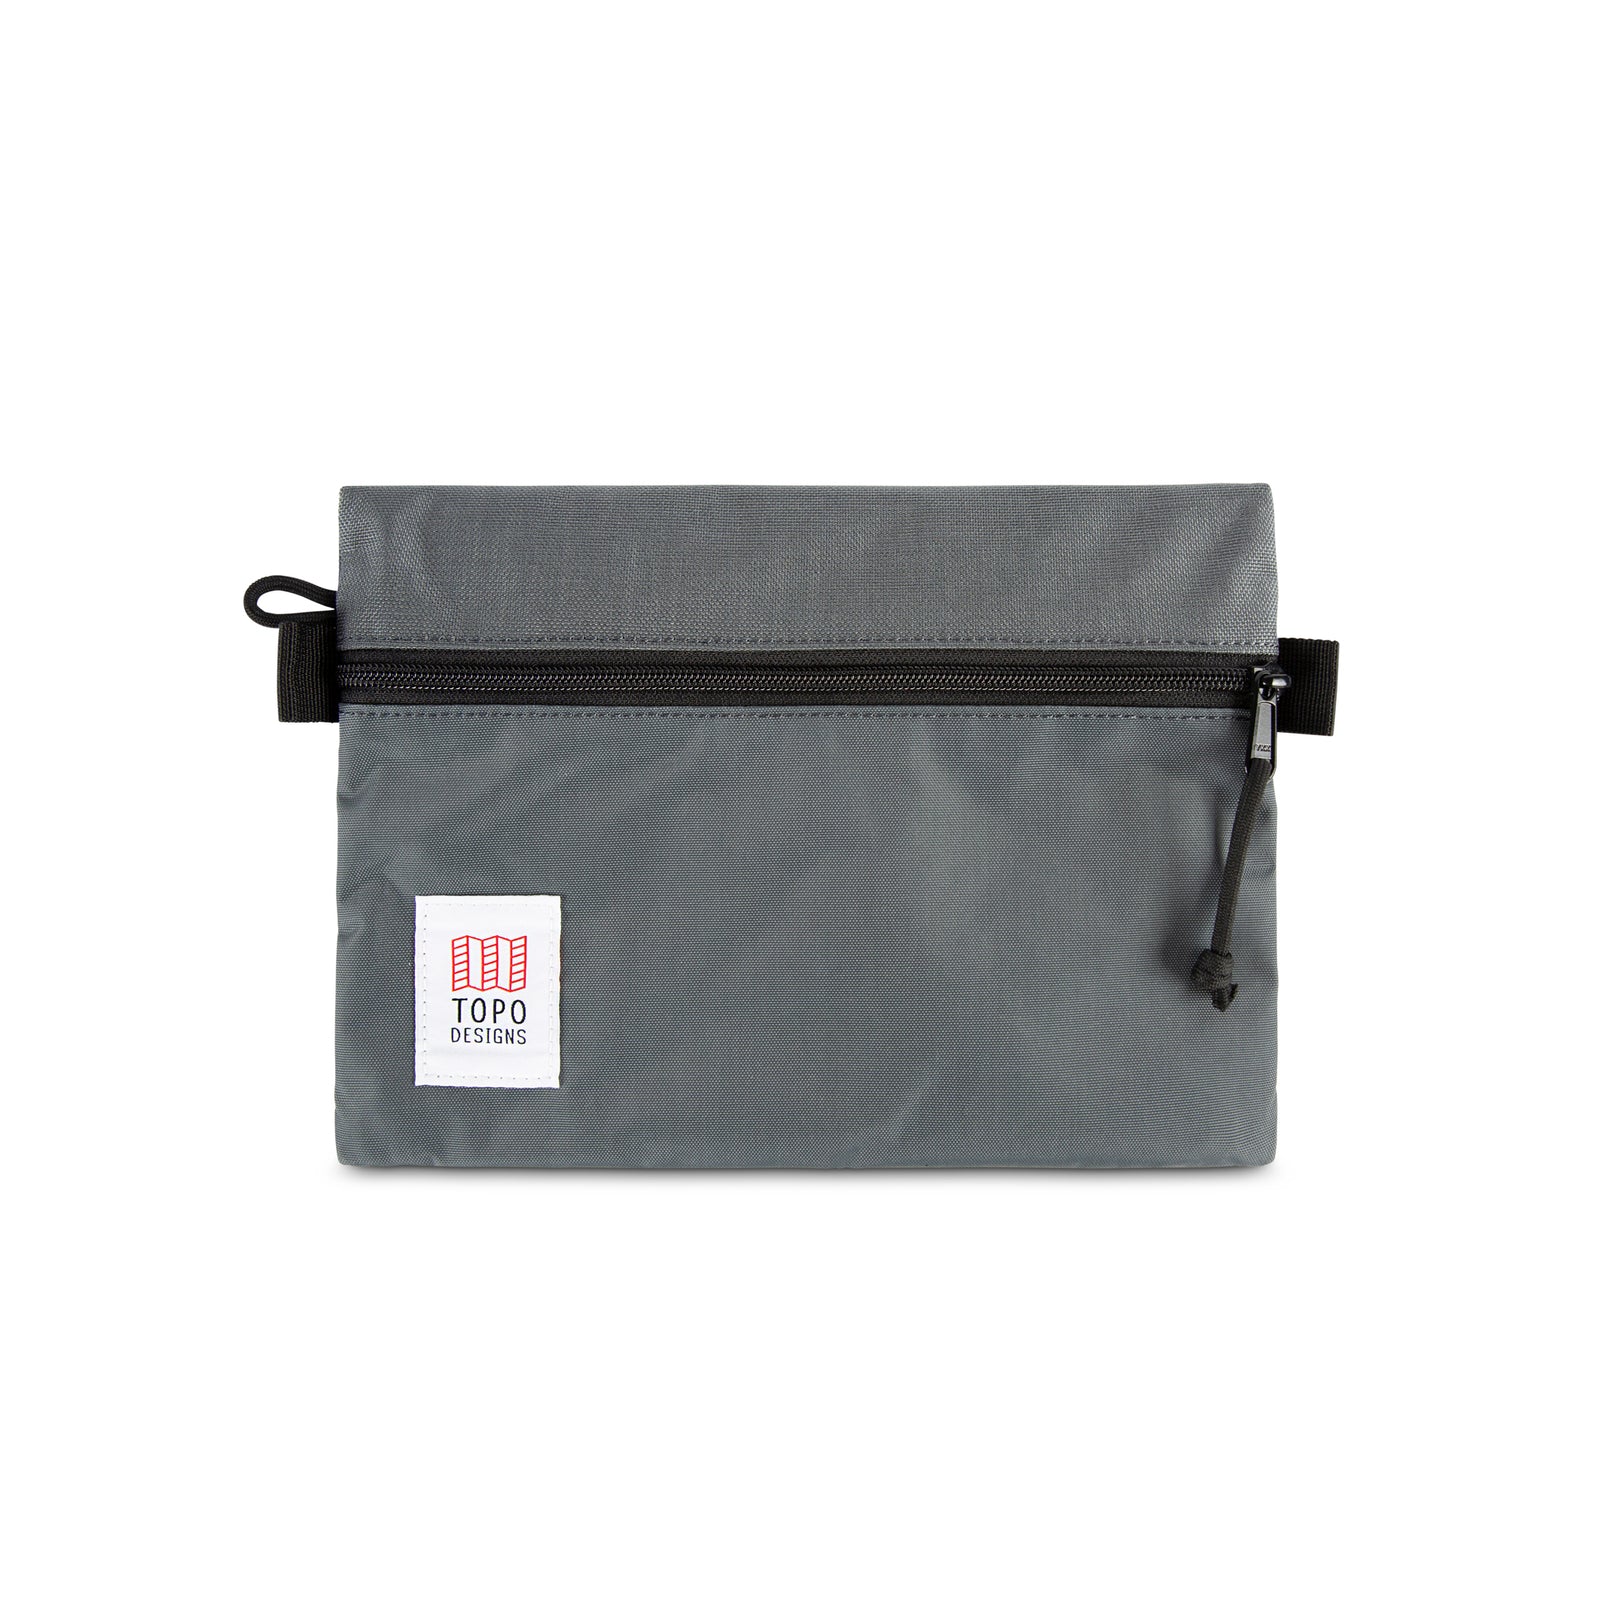 Topo Designs Accessory Bags in "Medium" "Charcoal - Recycled" gray.